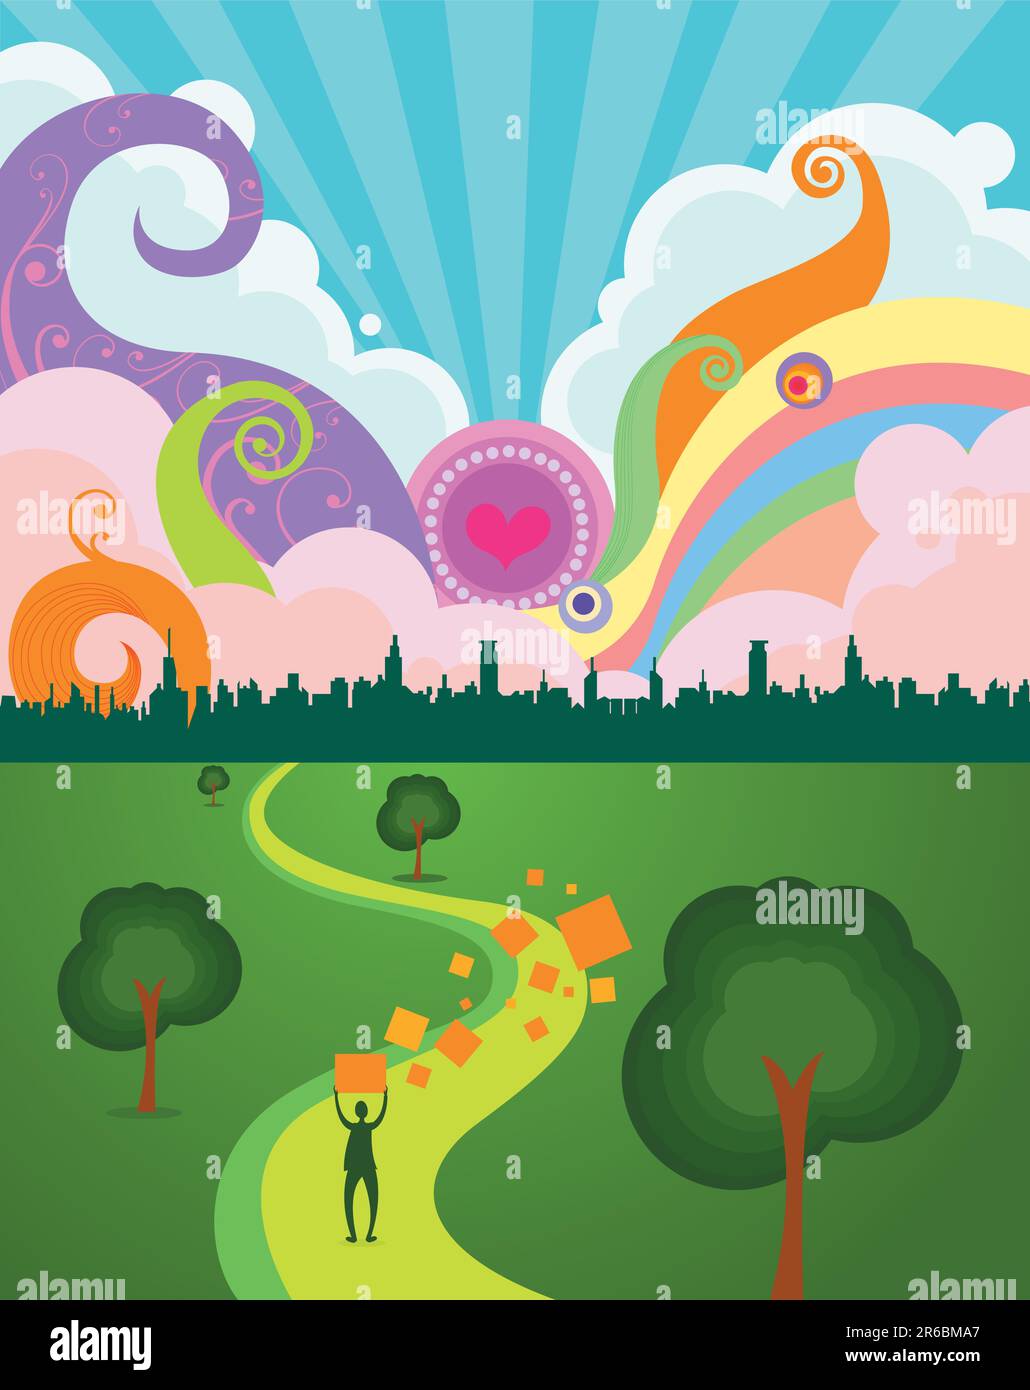 funky scenery background. created by Adobe Illustrator software. Stock Vector